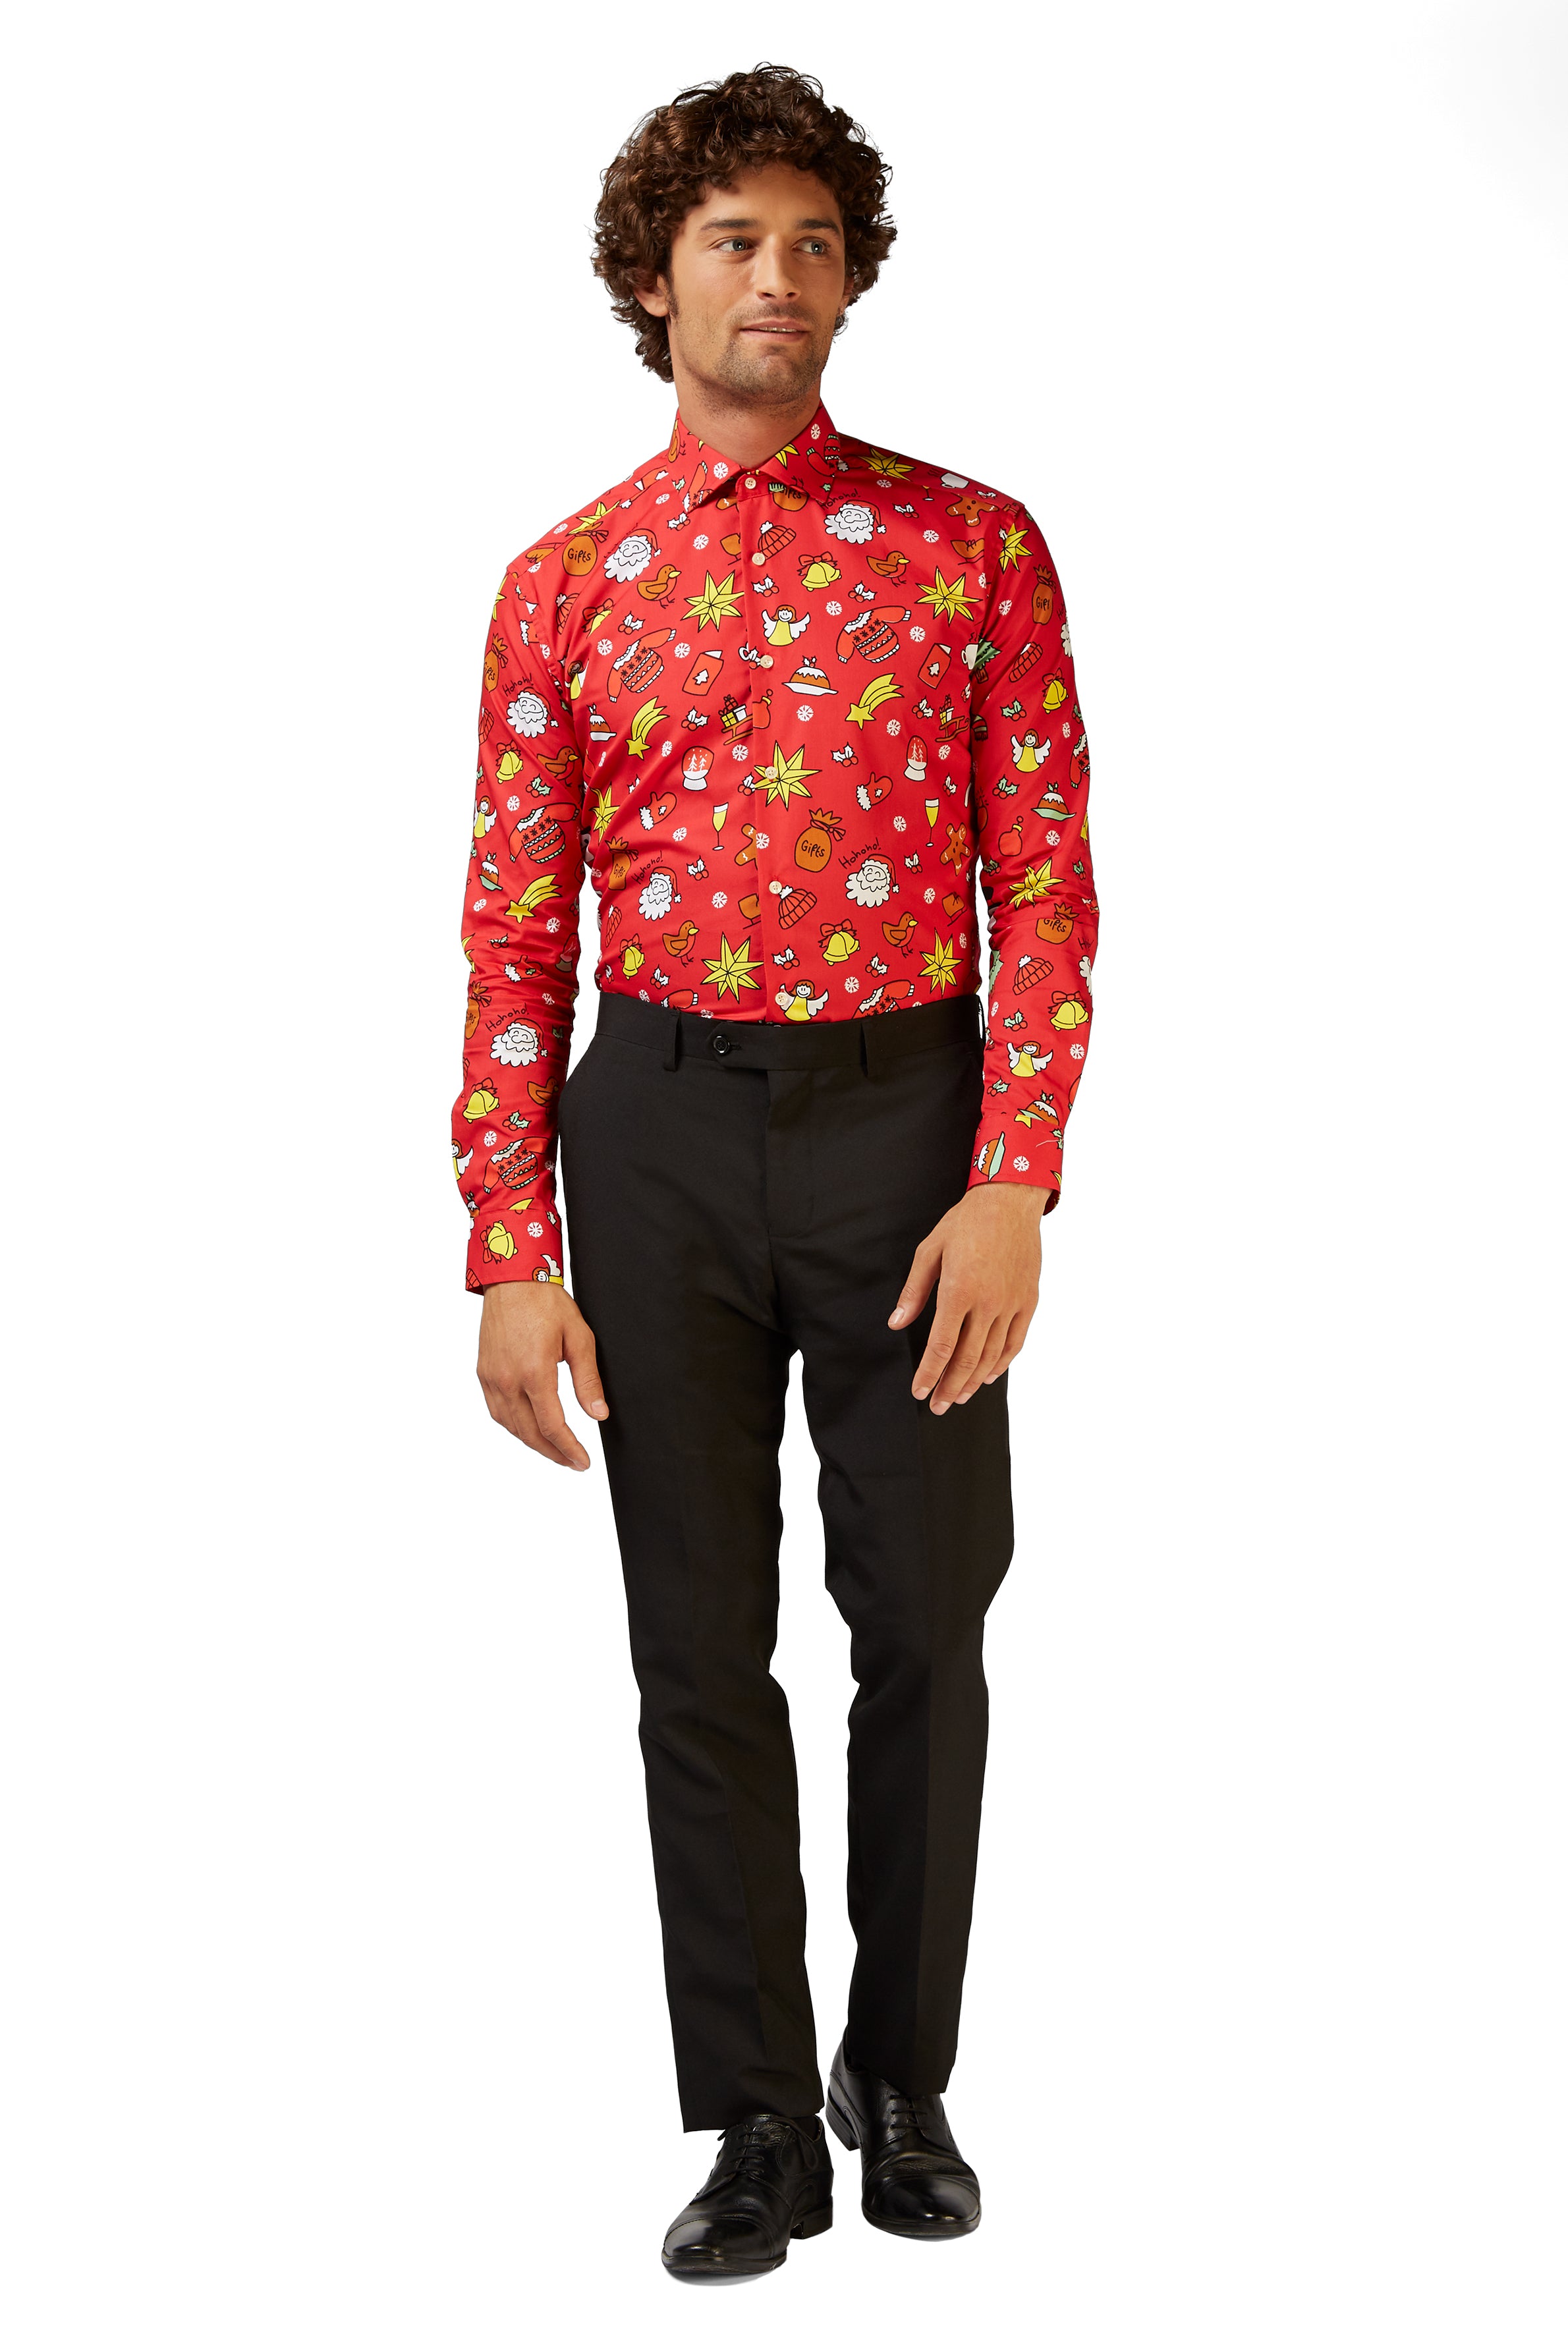 Chemise OppoSuits SHIRT LS Christmas Doodle Red